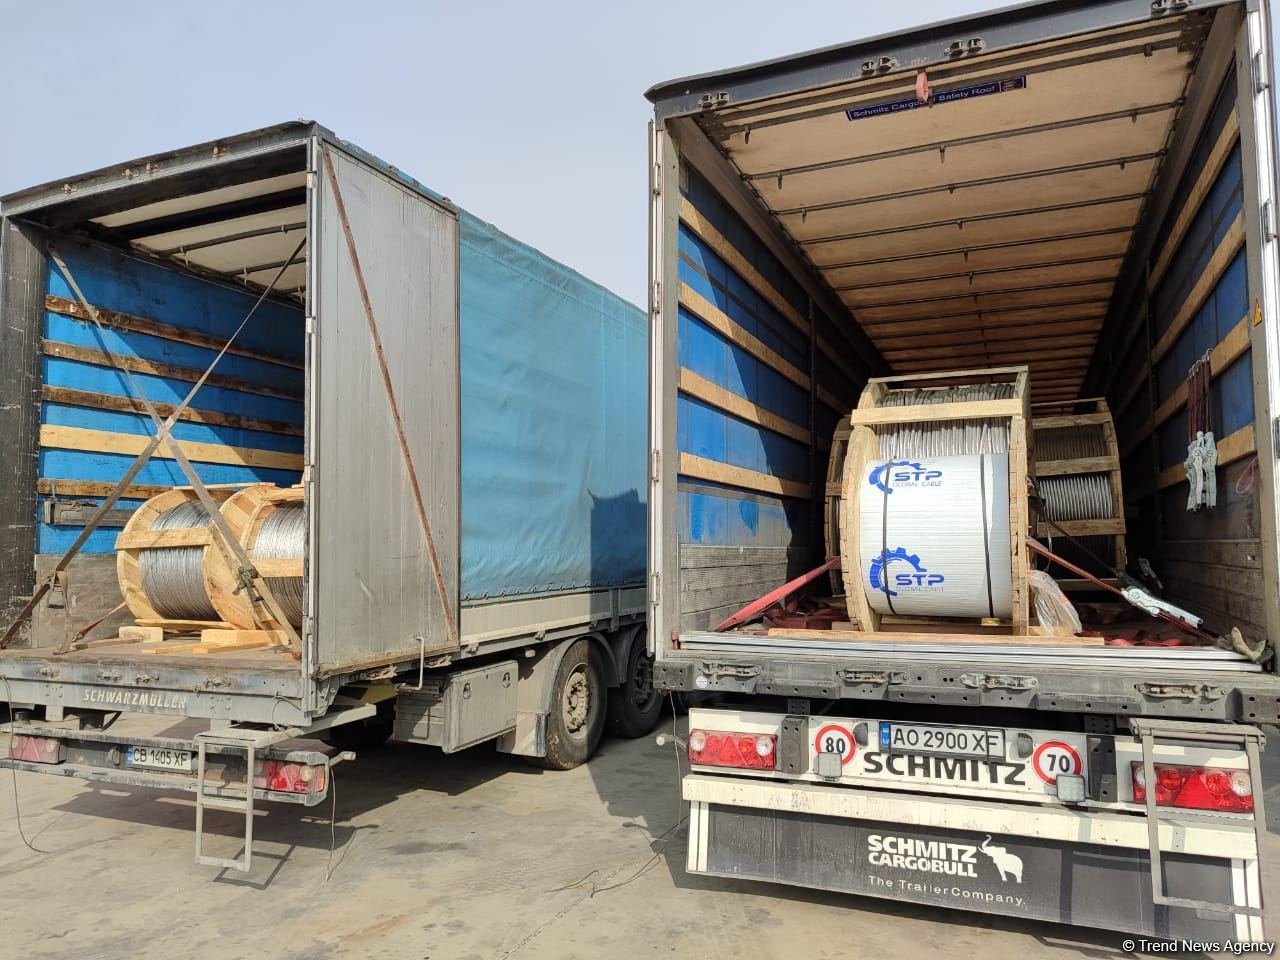 Azerbaijan sends another humanitarian aid of electrical equipment to Ukraine